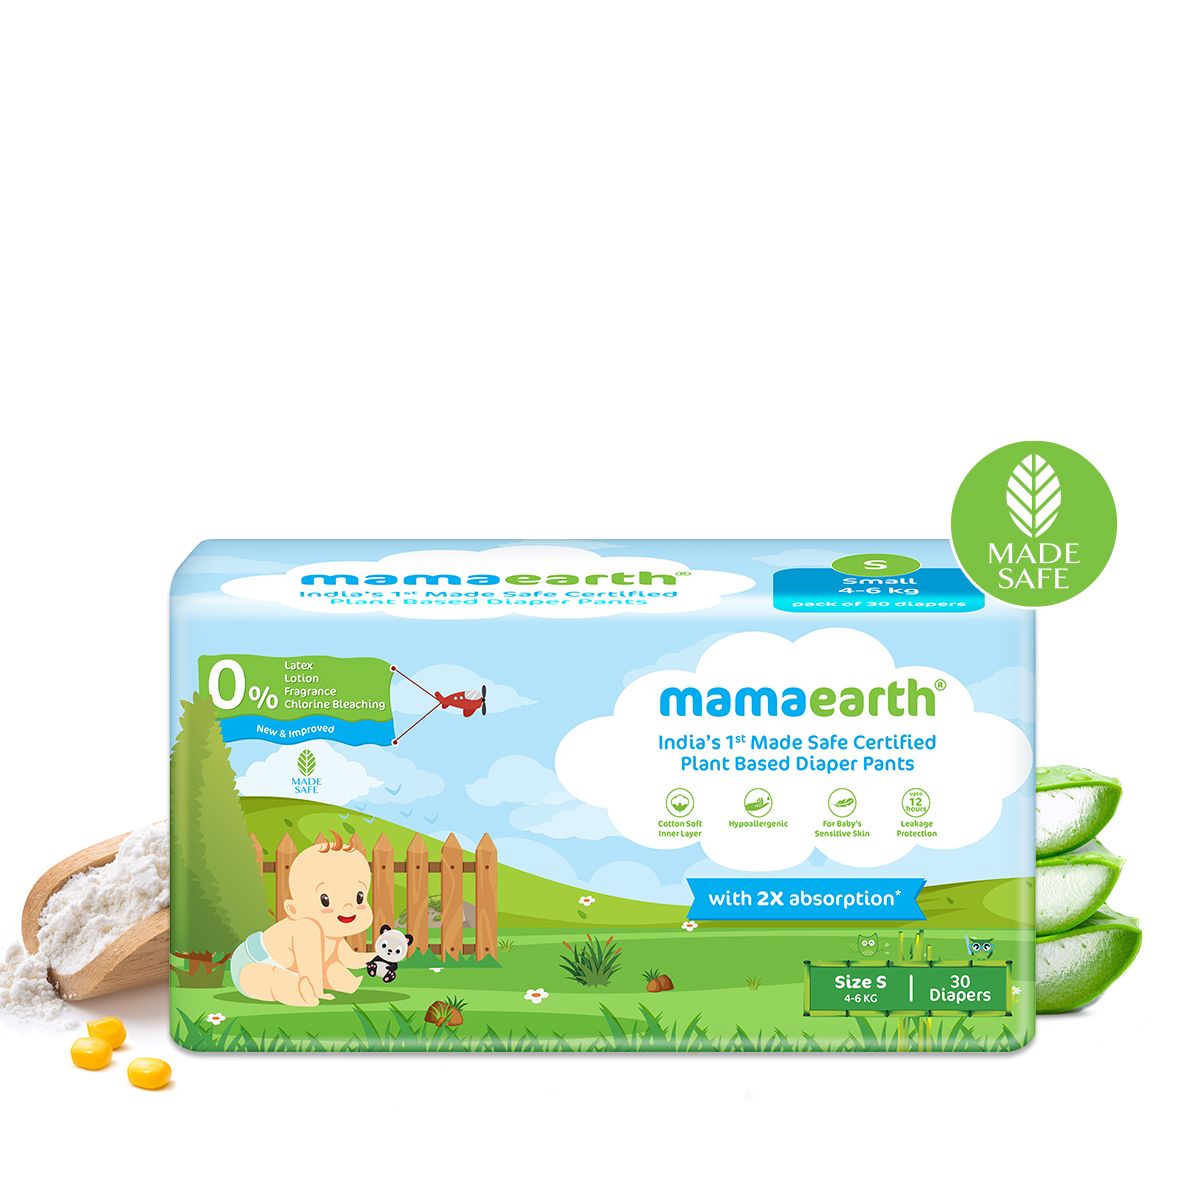 Buy HUGGIES WONDER PANTS EXTRA SMALL SIZE DIAPER PANTS 90 COUNT Online   Get Upto 60 OFF at PharmEasy